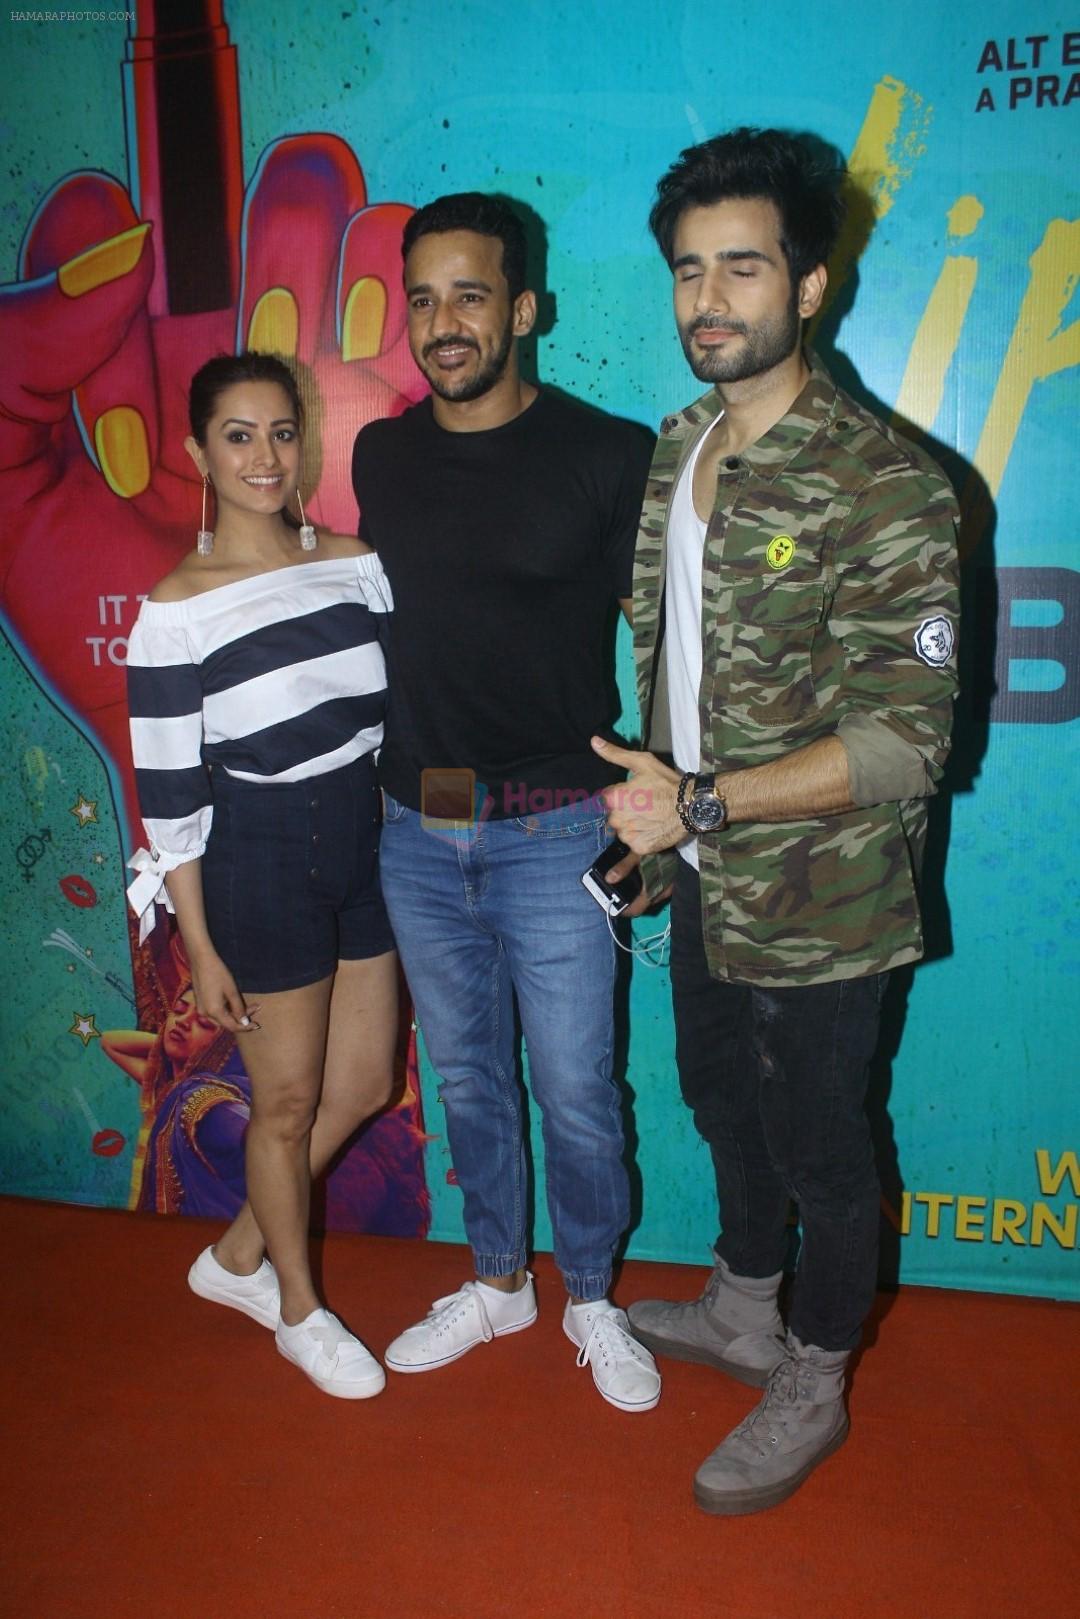 Karan Tacker, Anita Hassanandani, Rohit Reddy at the The Red Carpet along With Success Party Of Film Lipstick Under My Burkha on 28th July 2017